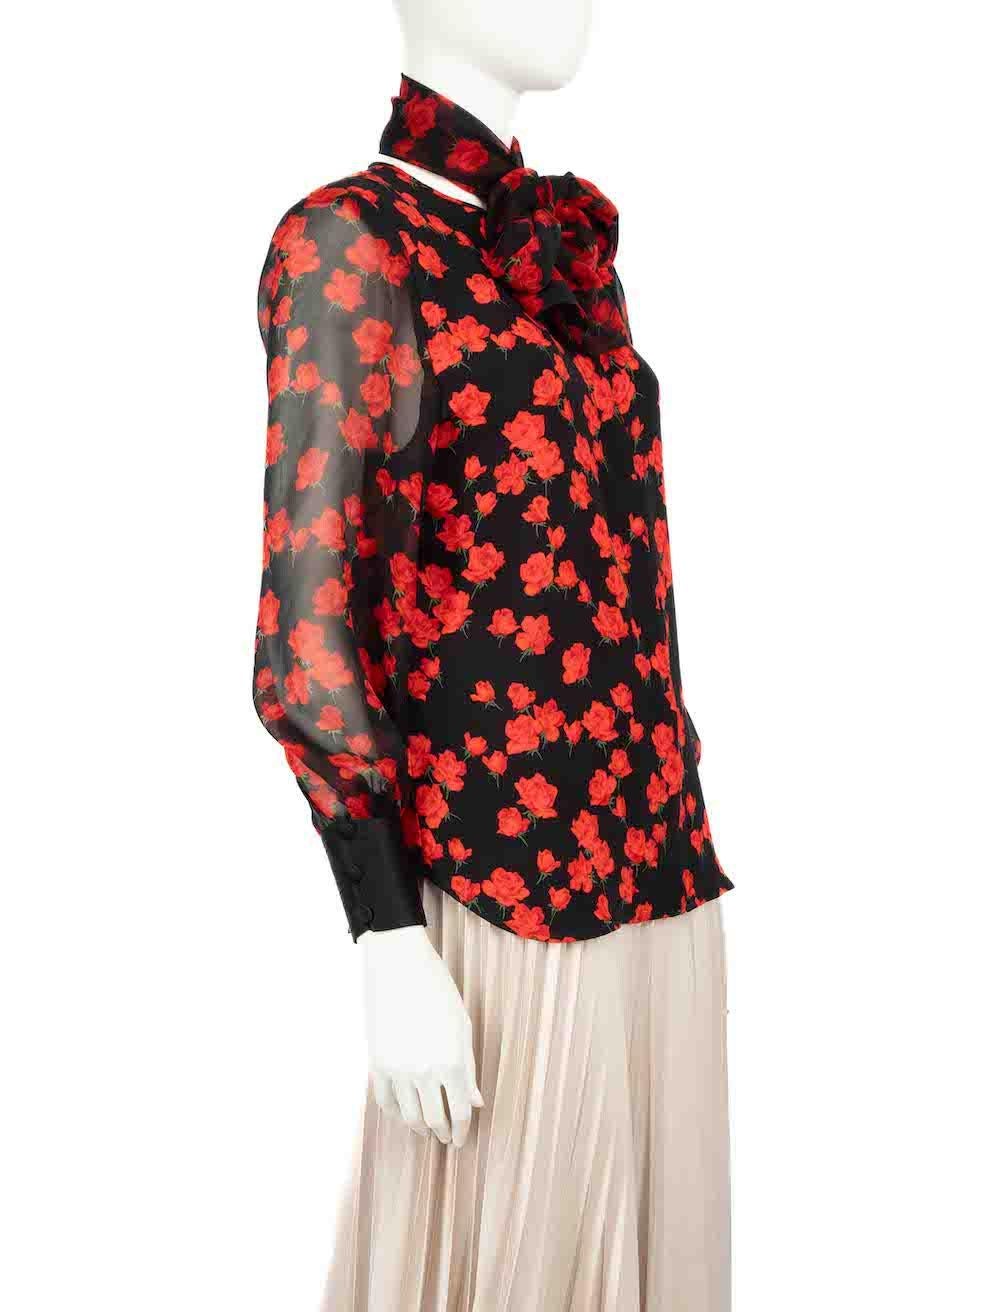 CONDITION is Very good. Hardly any visible wear to blouse is evident on this used Akris designer resale item.
 
 
 
 Details
 
 
 Black
 
 Silk
 
 Blouse with scarf
 
 Rose pattern
 
 Long sleeves
 
 Round neck
 
 Button up fastening
 
 Sheer
 
 
 
